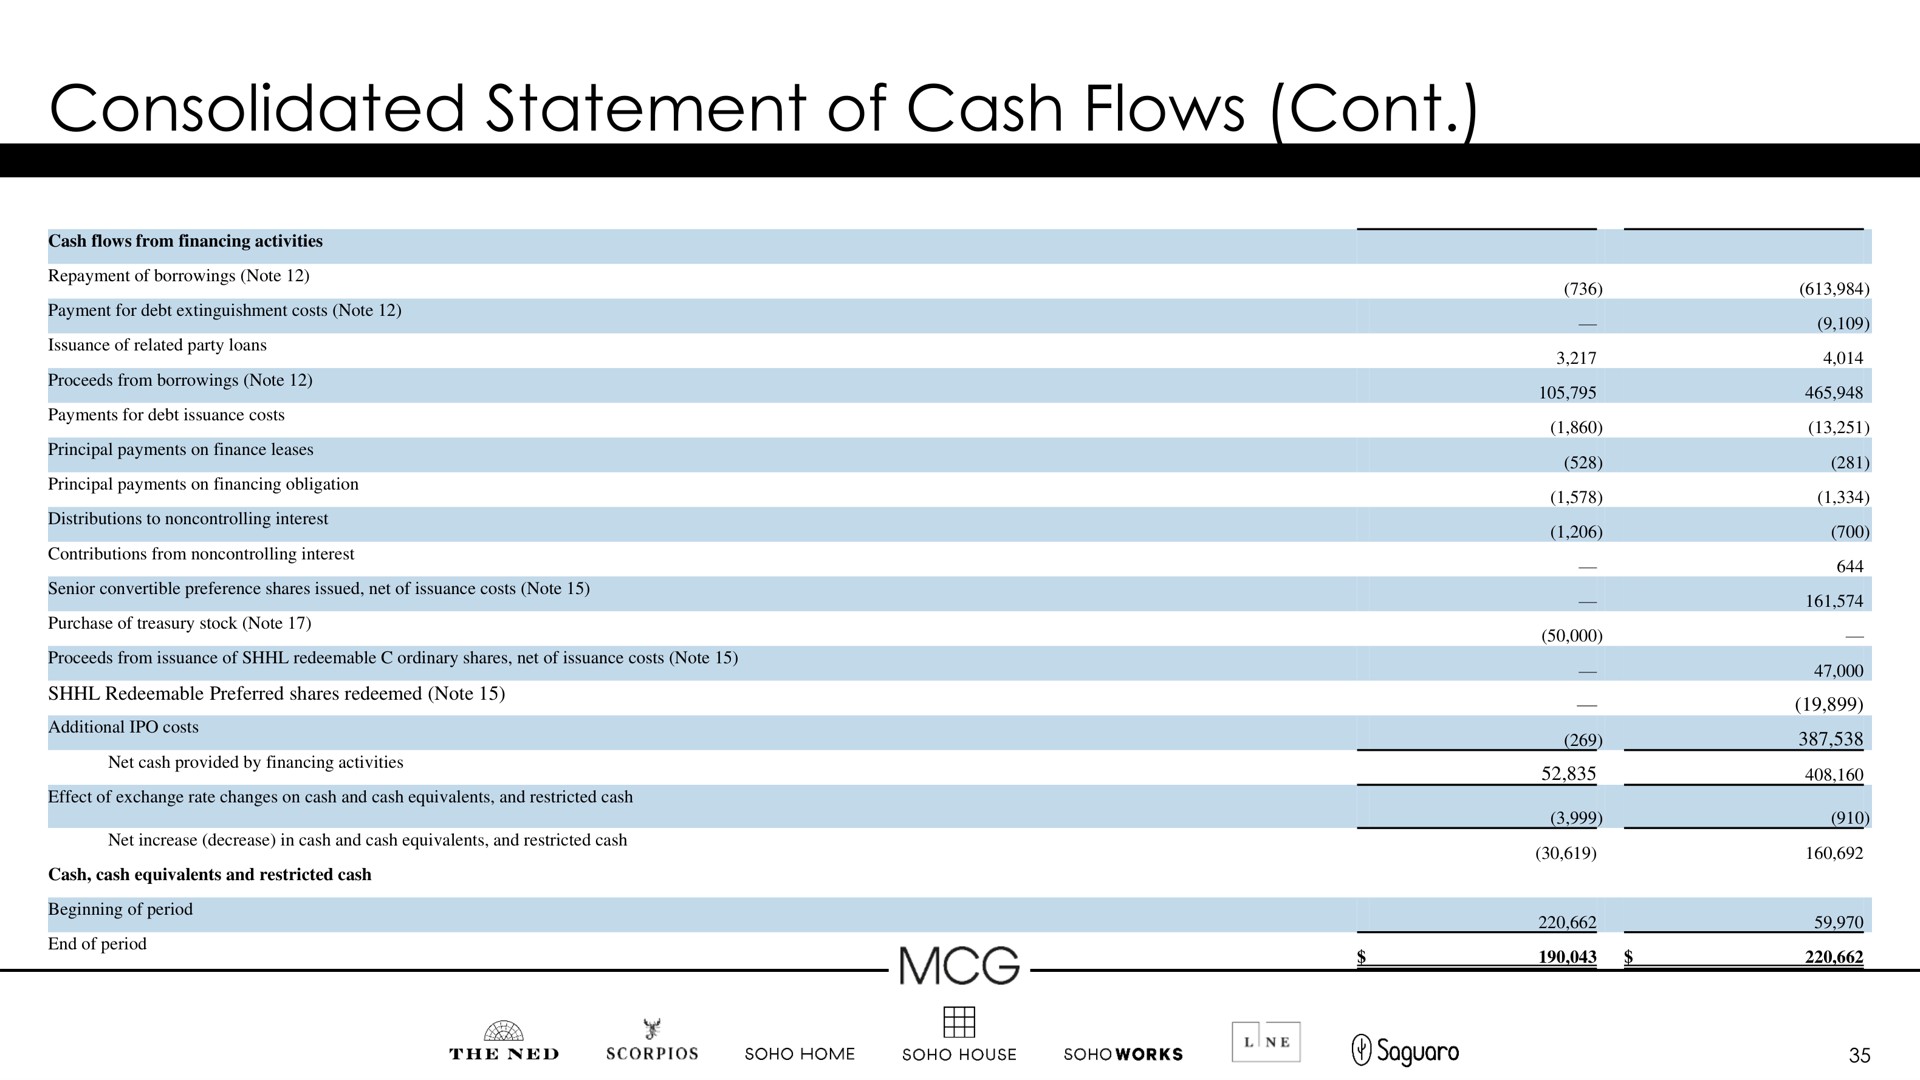 consolidated statement of cash flows | Membership Collective Group